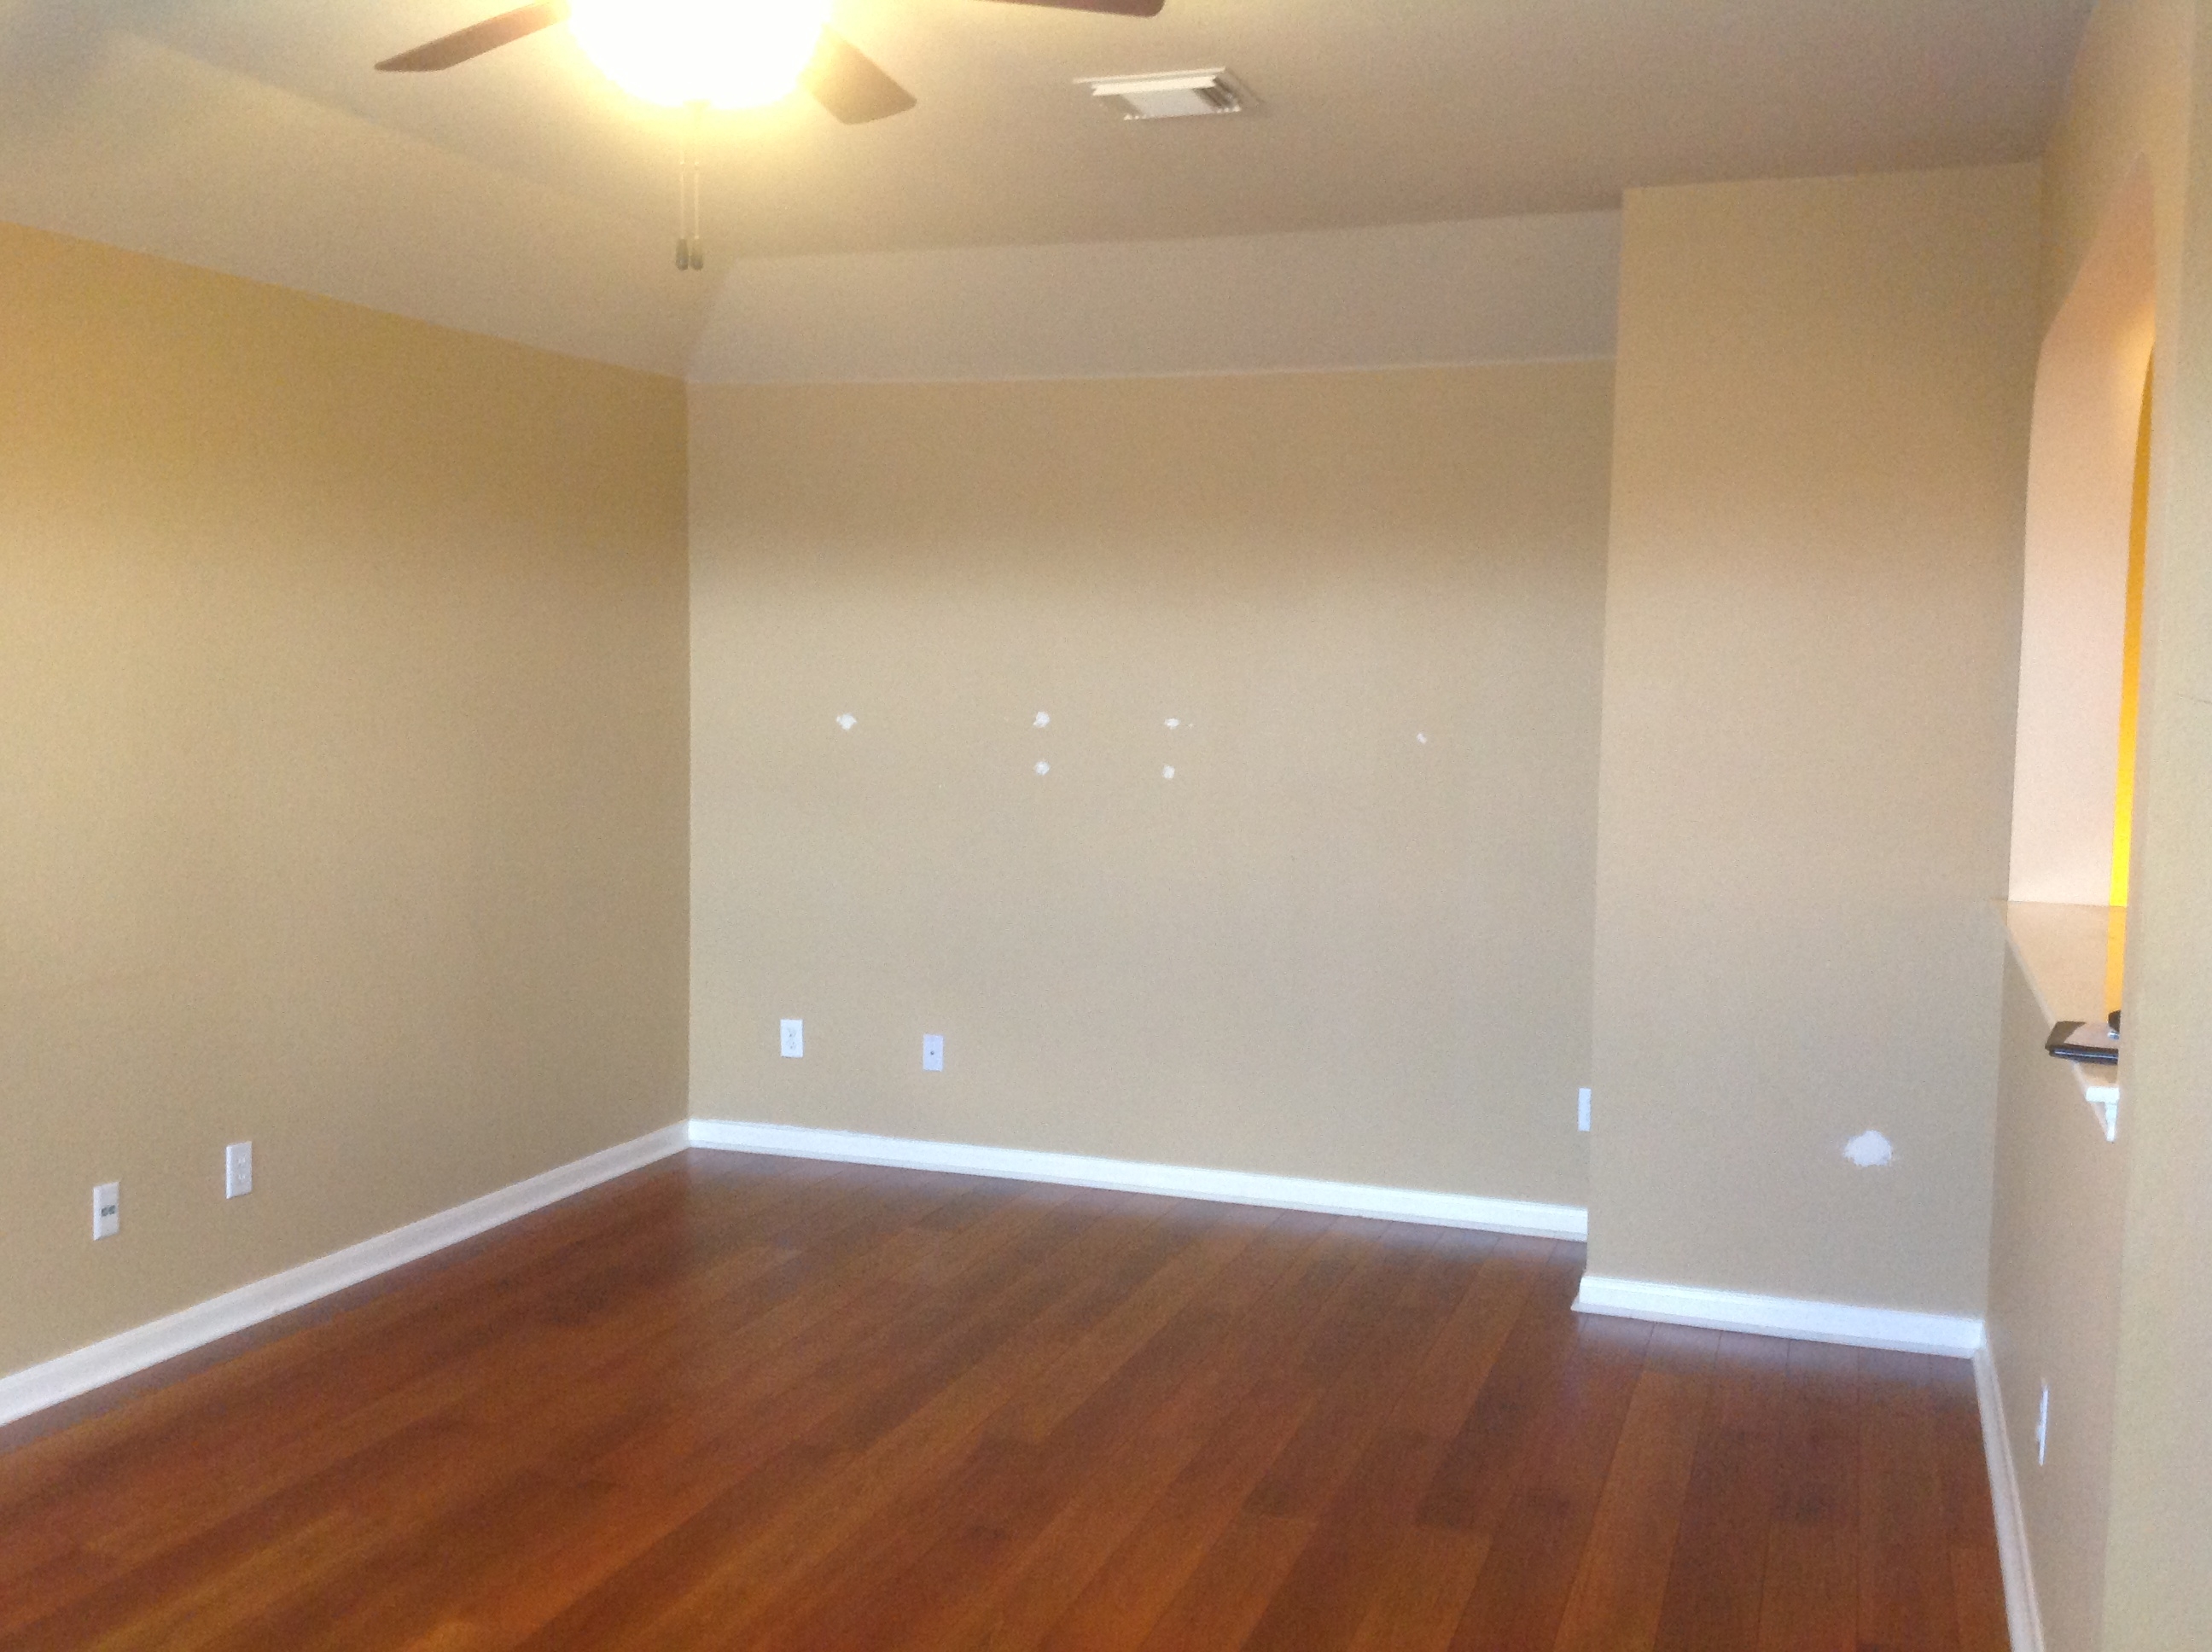 Vacant Staging - Game room BEFORE